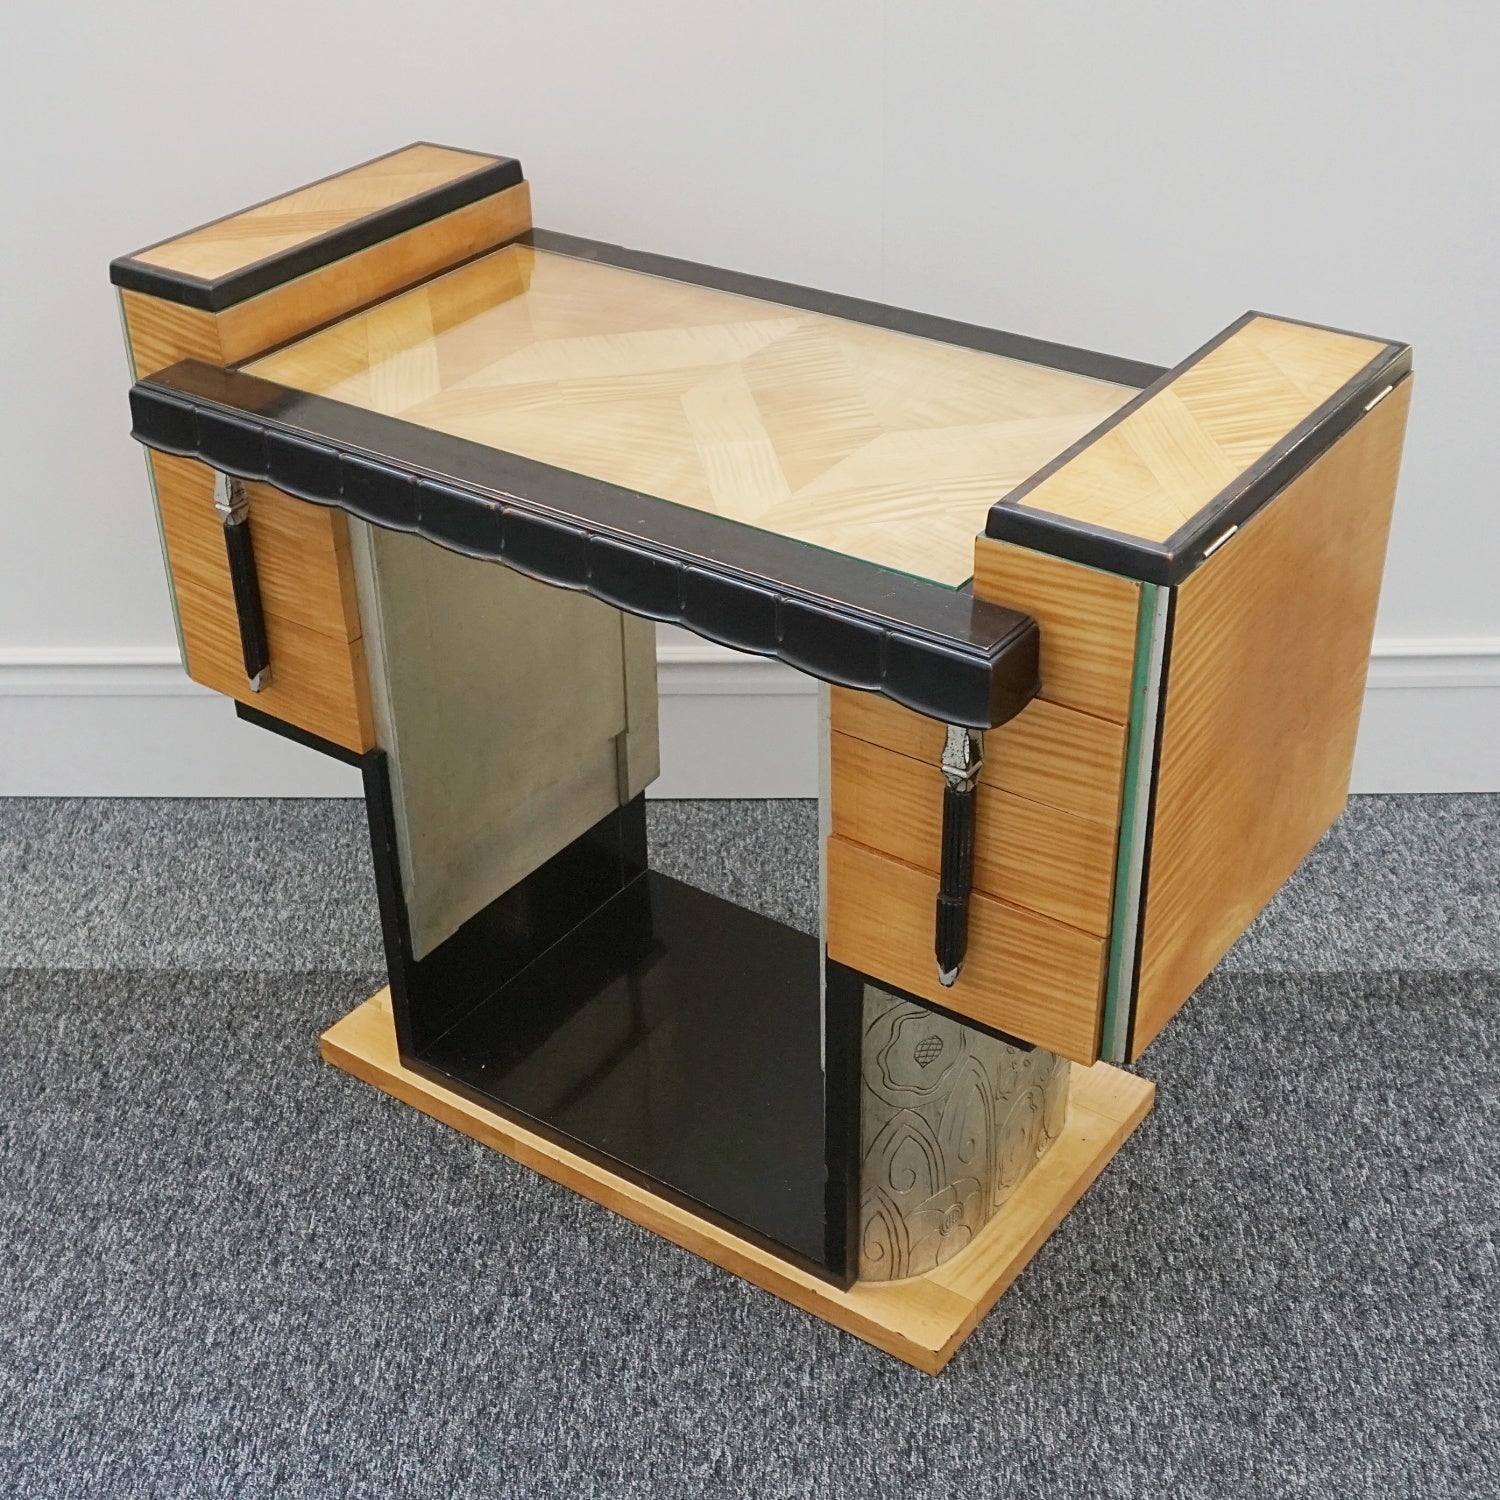 An Art Deco Console table by Serge Ivan Chermayeff (1900-1996) for Waring & Gillows. Satin birch veneered with ebonised banding. Original ebonised and silver painted handles. Three deep drawers to either side with two partitioned compartments to